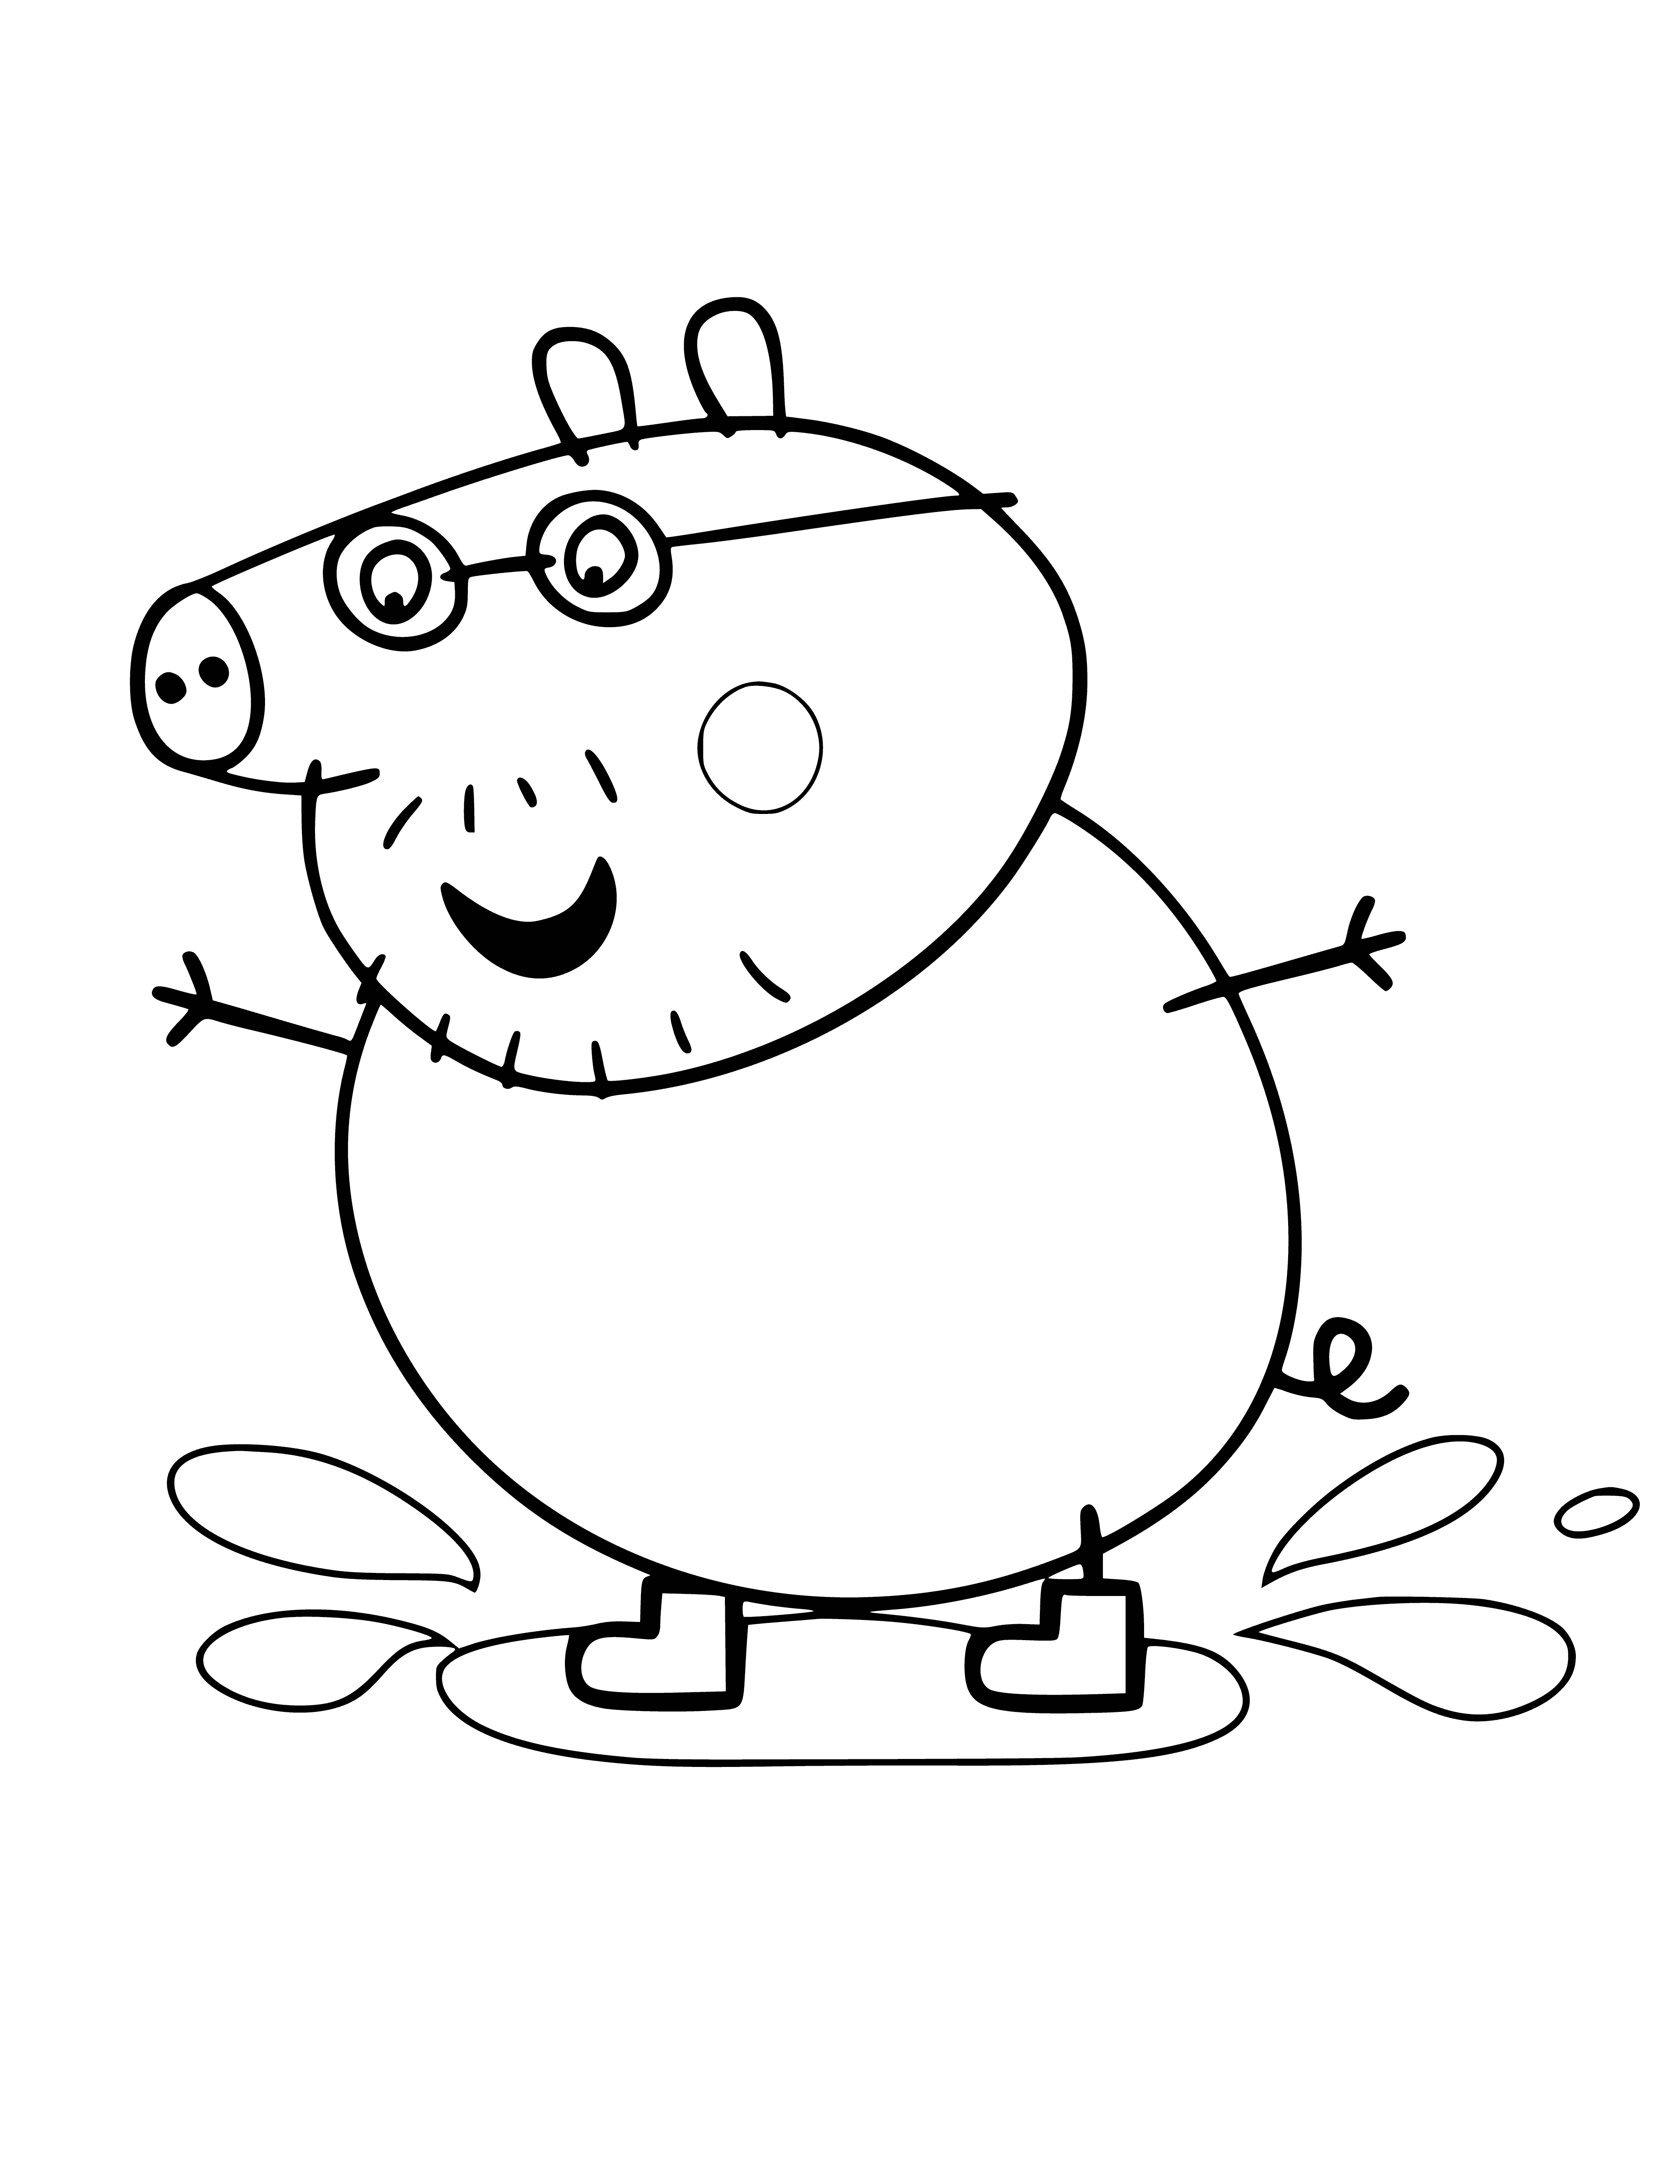 coloring page: Daddy pig stands in a puddle wearing a blue shirt & pink nose, with a large tree behind him in the coloring page.